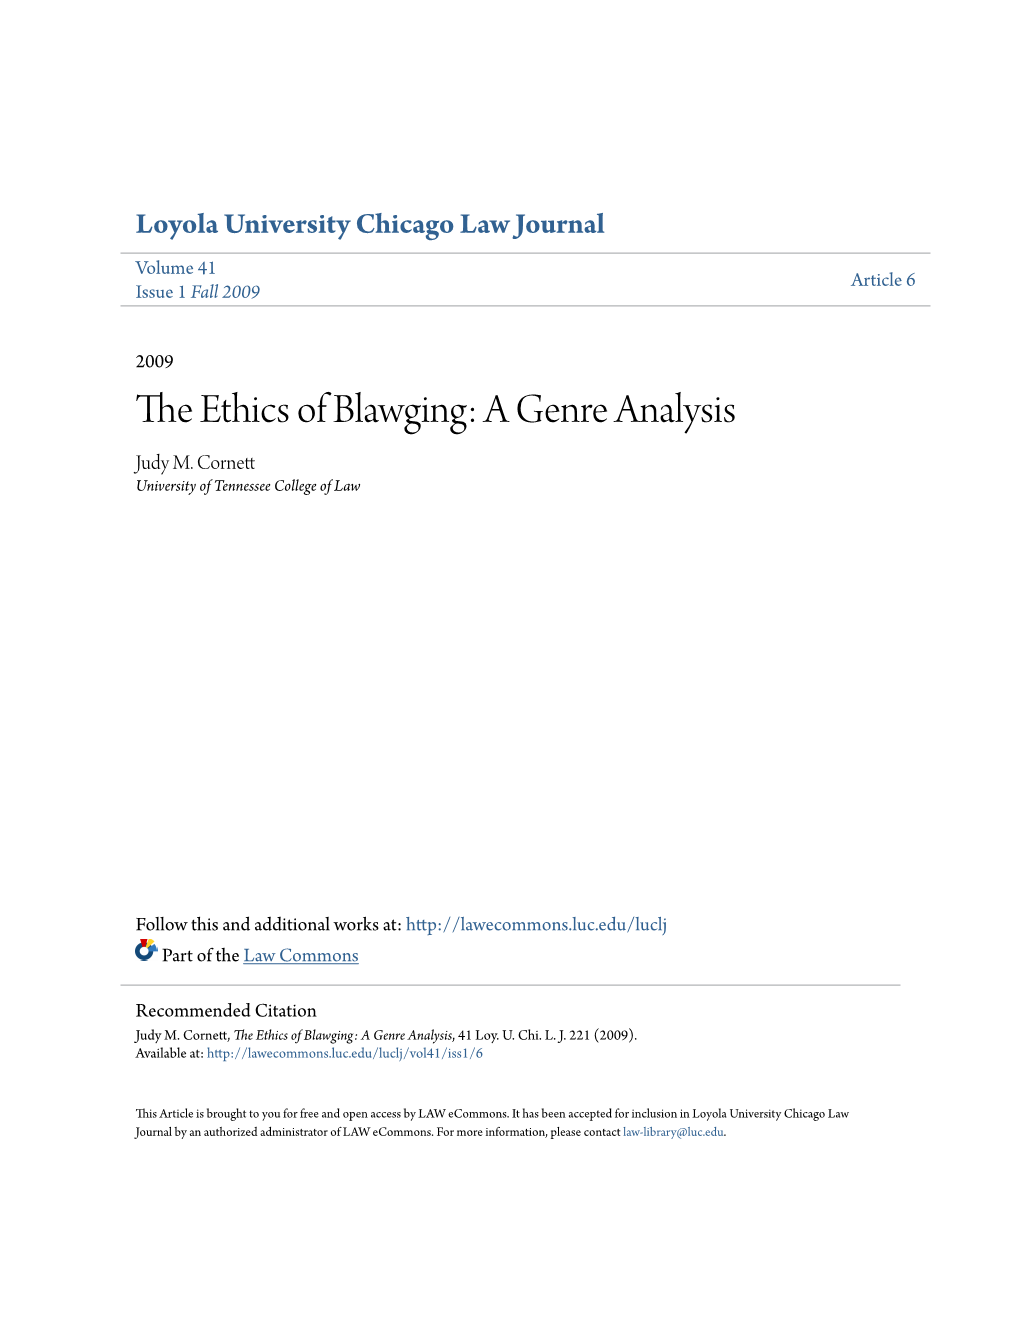 The Ethics of Blawging: a Genre Analysis, 41 Loy